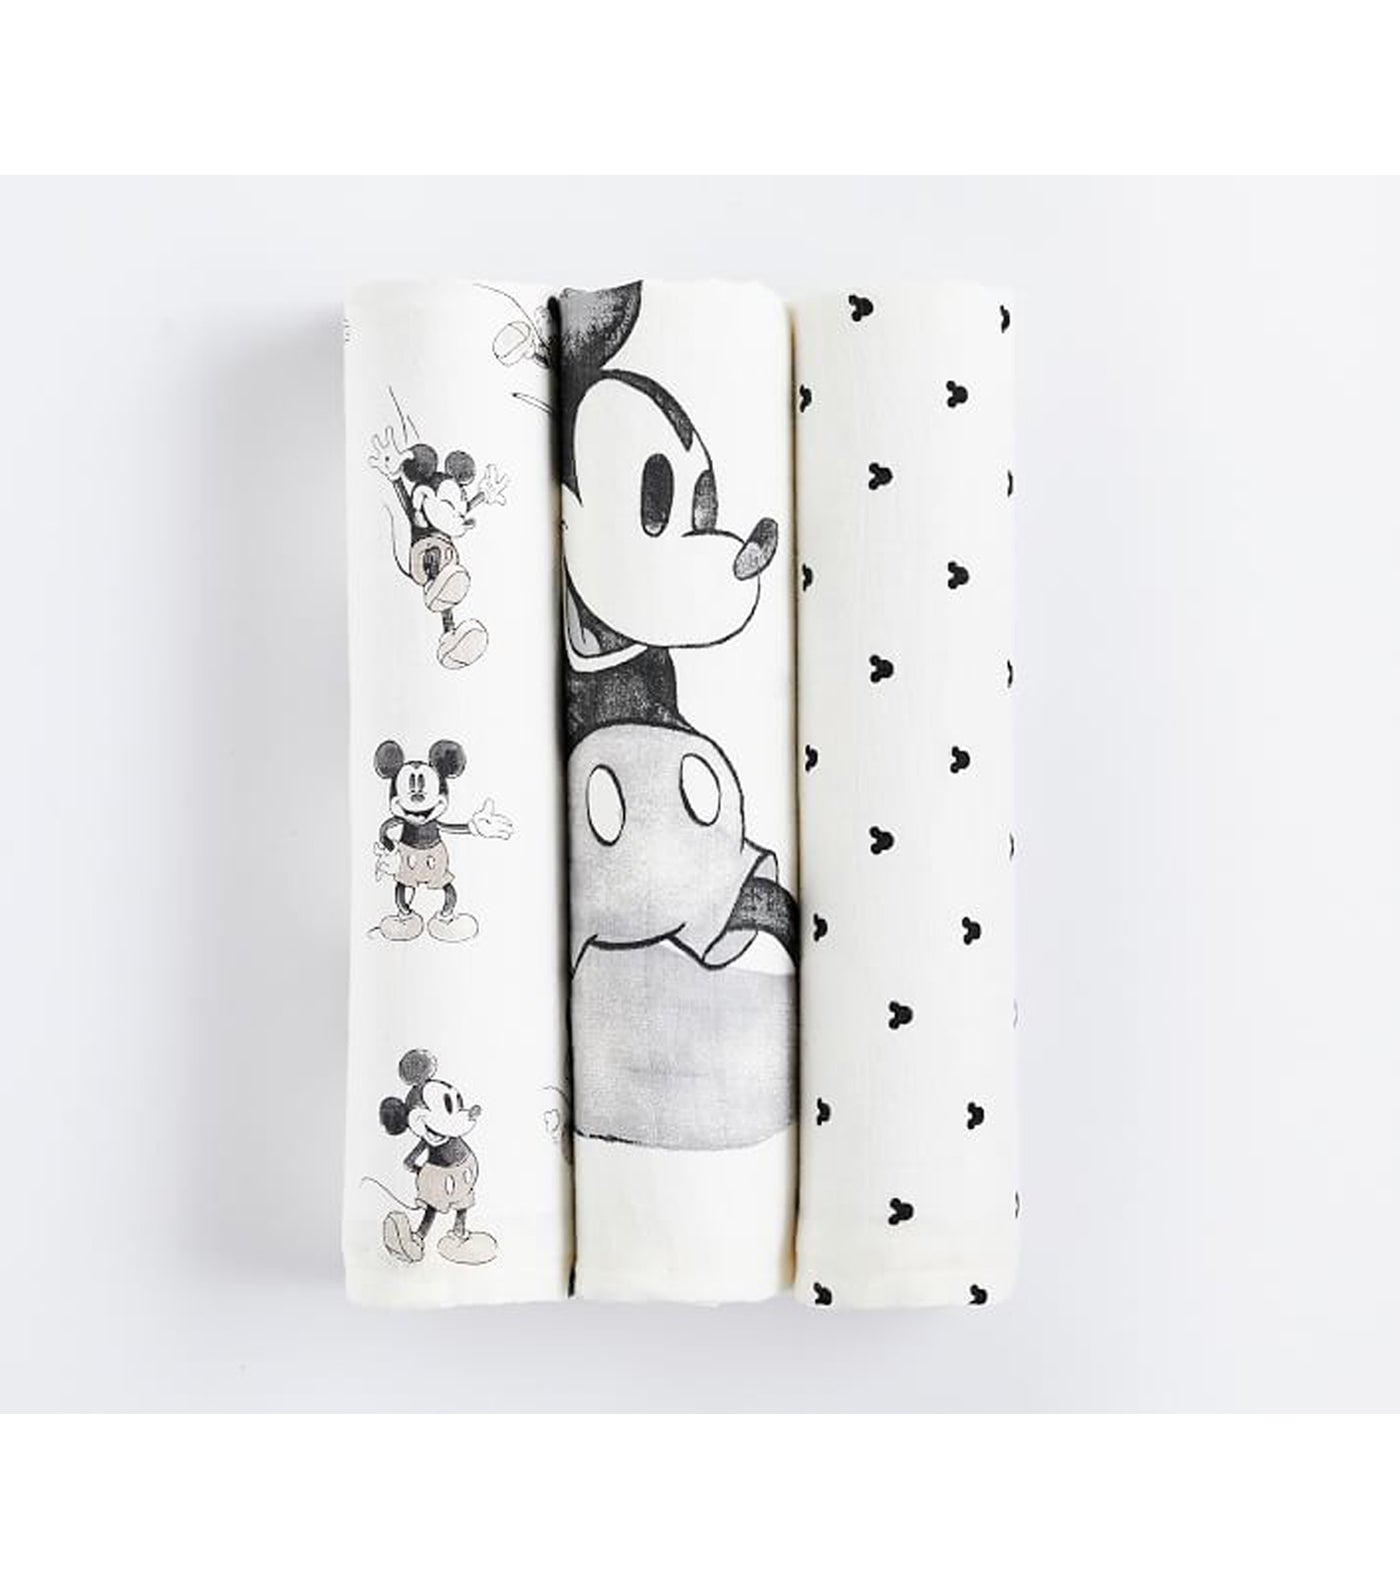 Disney Mickey And Minnie Mouse Organic Swaddle Set - Multi